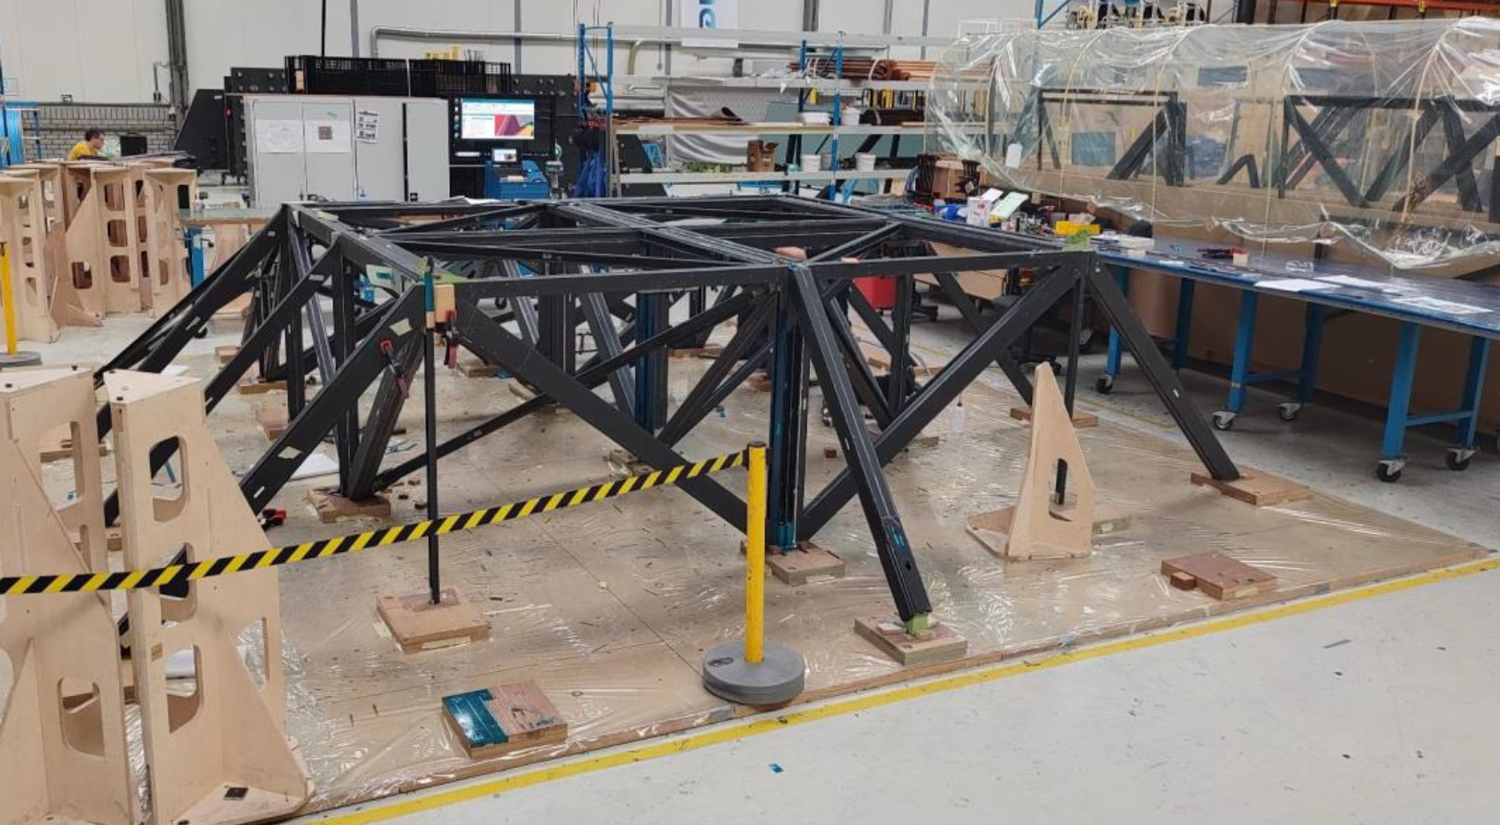 Carbon fiber-reinforced plastic truss assembly for the primary mirror backup structure of FYST. Credit: CCAT Observatory, Inc.